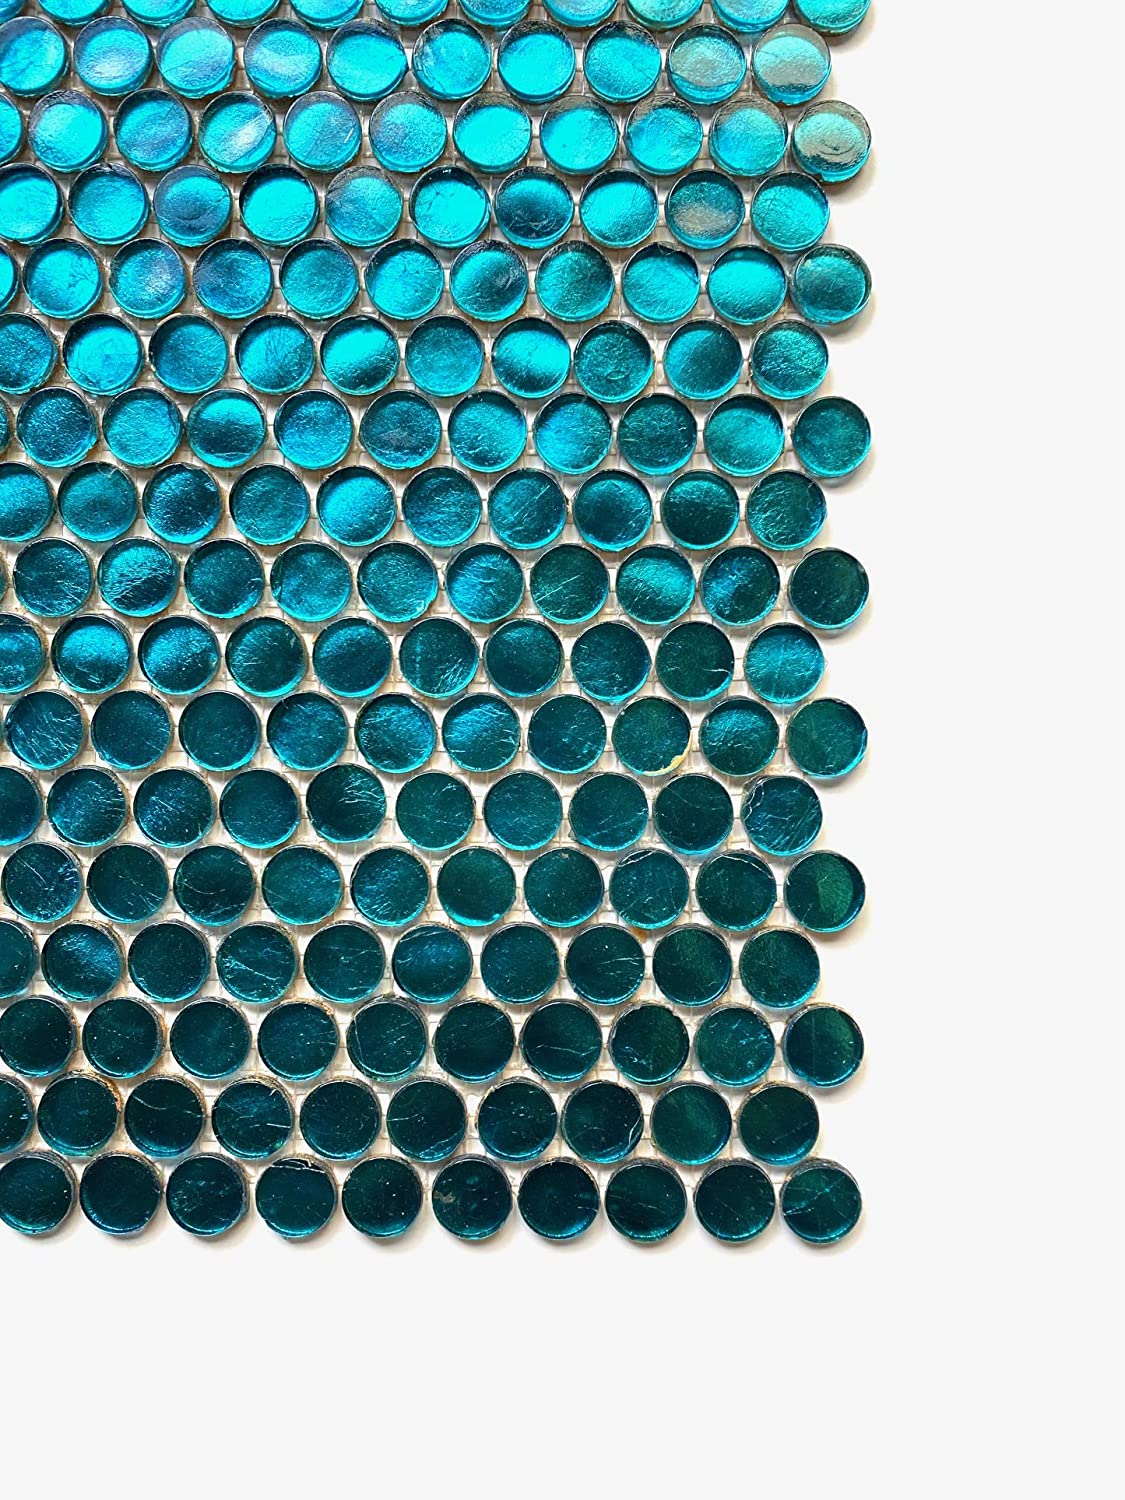 Aqua Aruba Turquoise Shimmer Penny Round Glass Mosaic Wall Tile (Box of 10 Sqft) for Bathroom and Kitchen Walls Kitchen Backsplashes